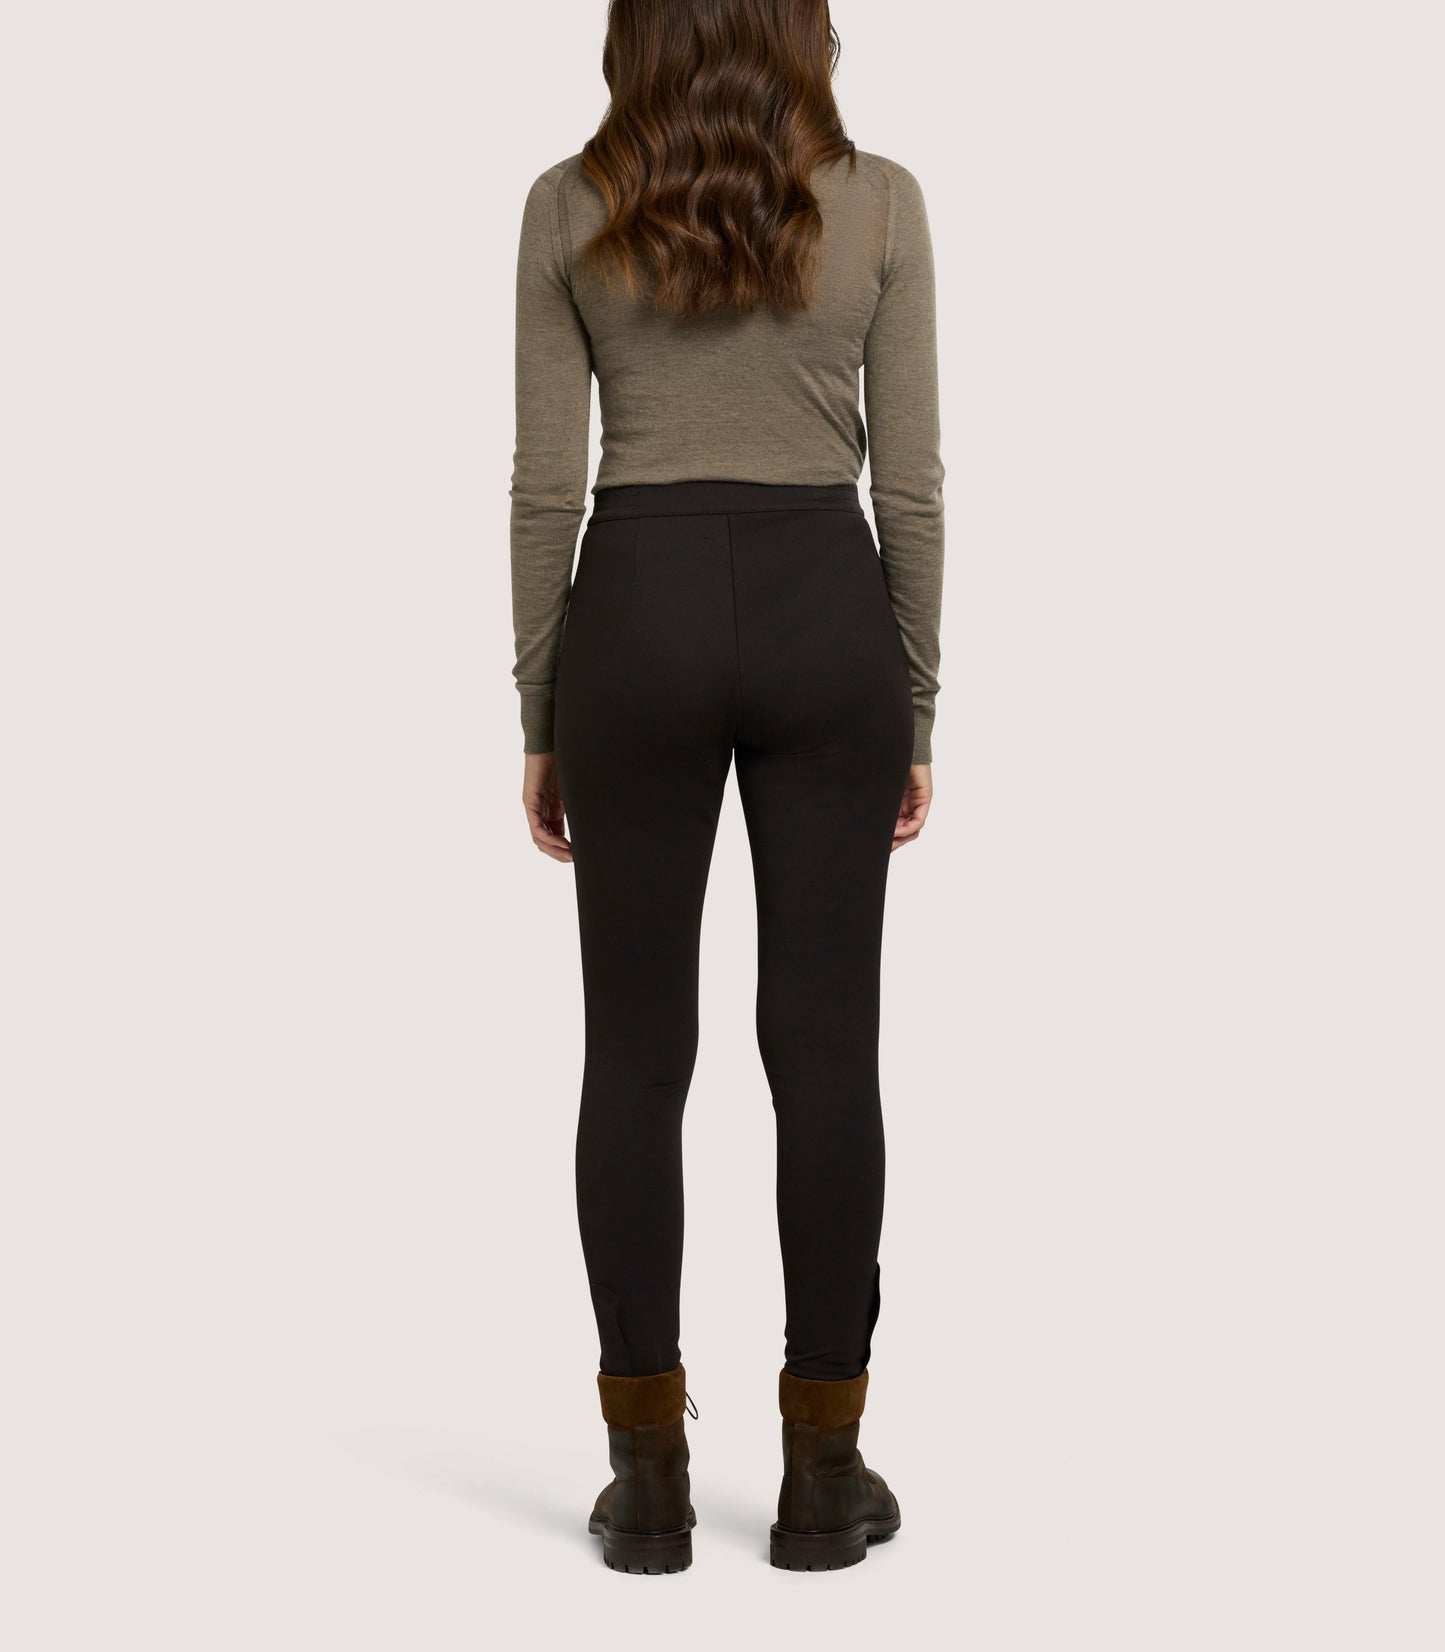 Women's Performance Twill Trouser in Chocolate